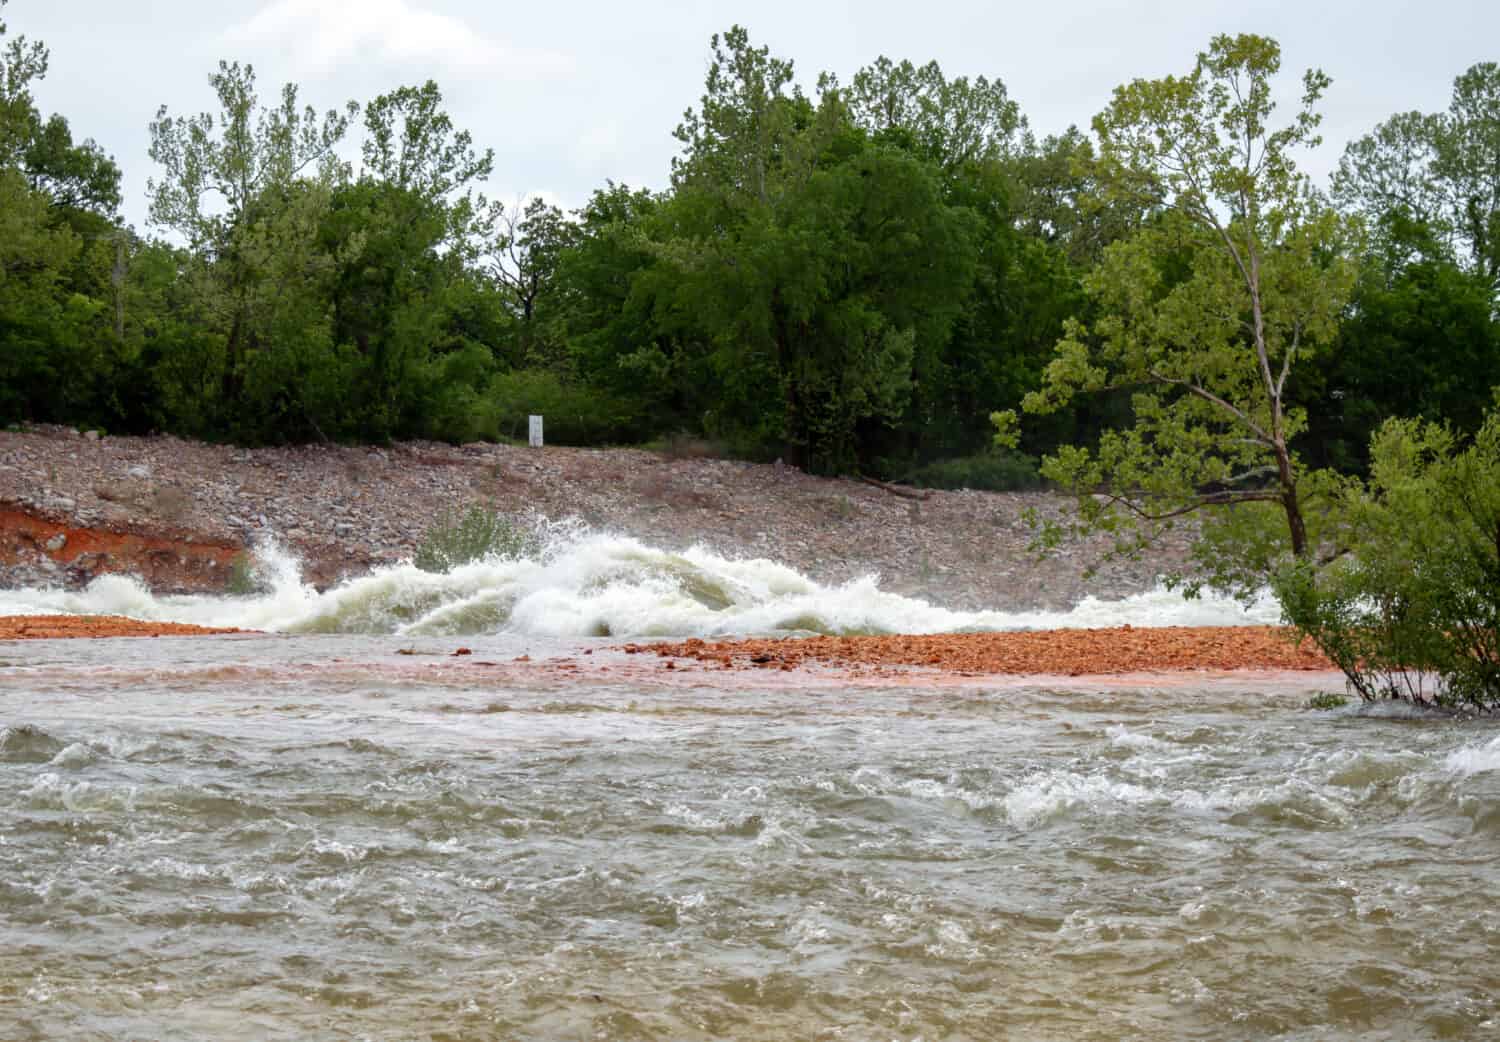 The Oklahoma flood of 2015 gives us a glimpse of what may happen if the largest dam in Oklahoma were to break.